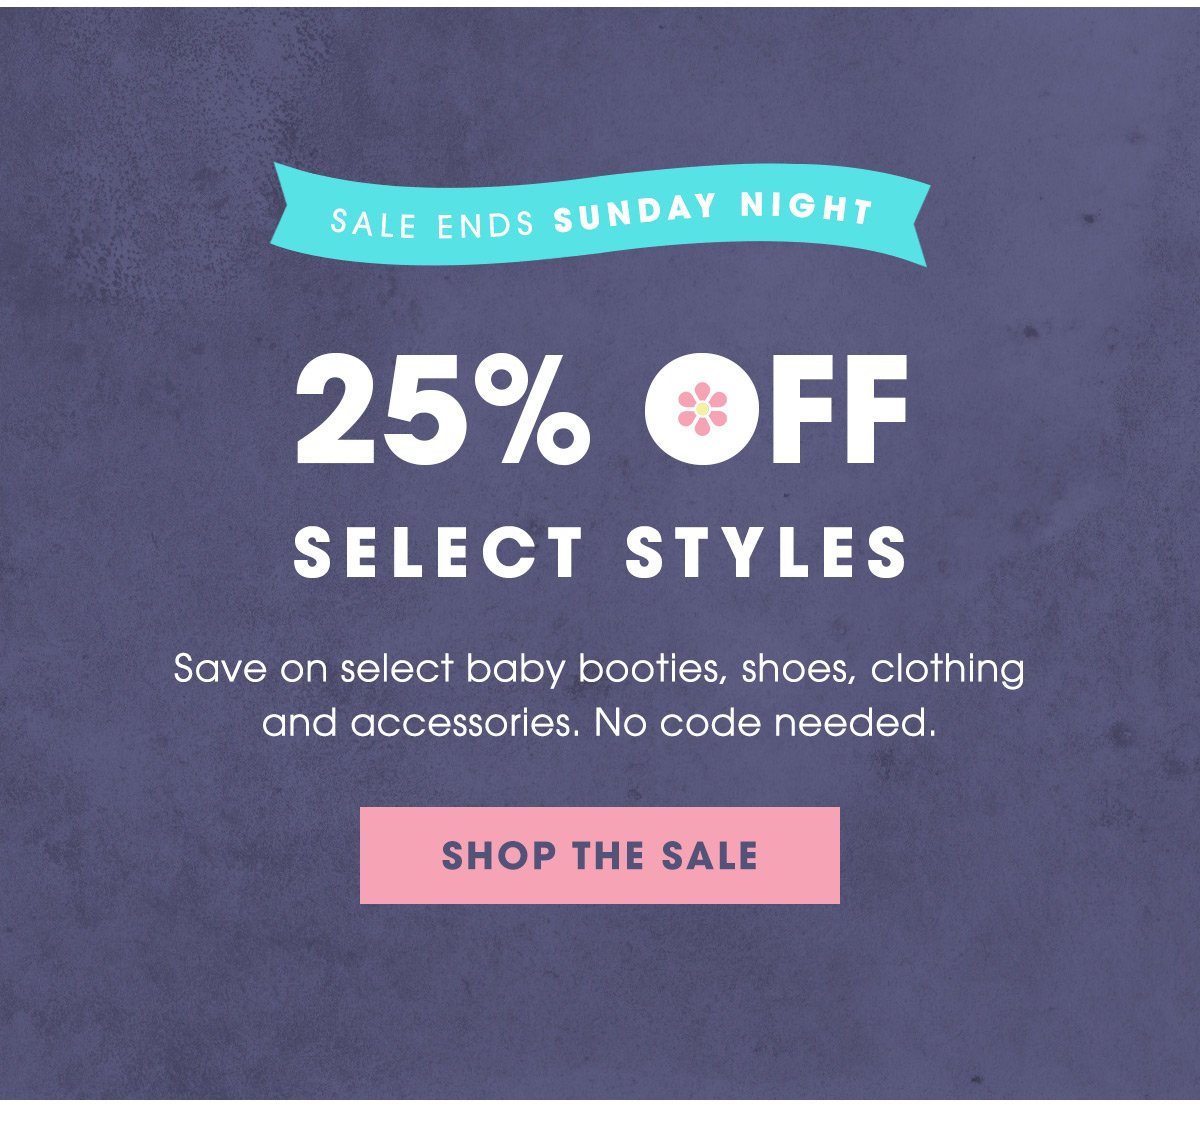 Sale Ends Sunday Night - 25% Off Select Styles - Save on select baby booties, shoes, clothing and accessories. No code needed